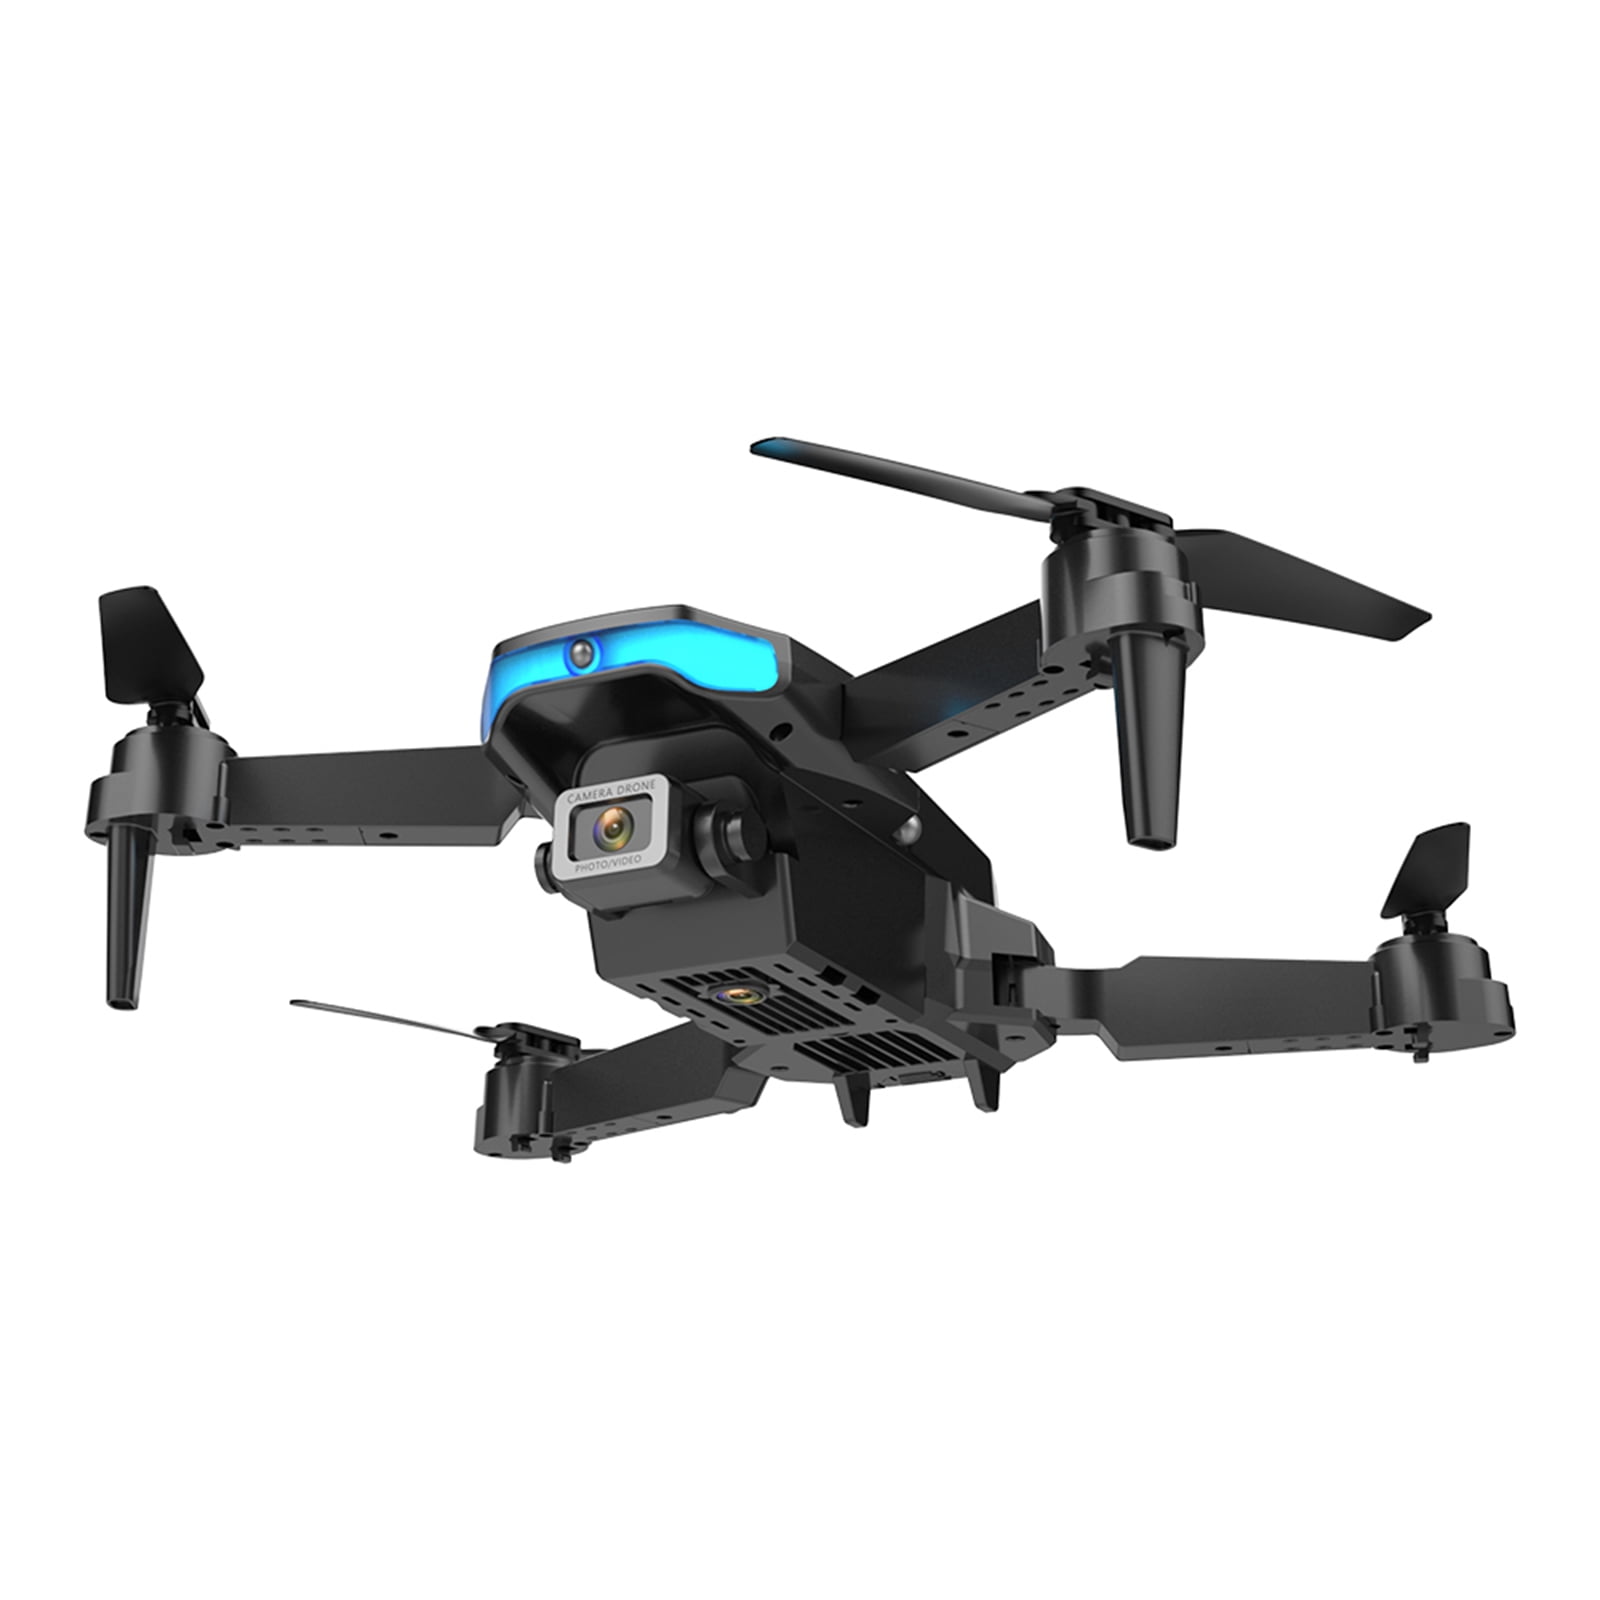 DRONE CAMERA DUAL CAMERA 4K SHOOTING VIDEOES AND PHOTOS IN 4K - Accessories  - 1680247125